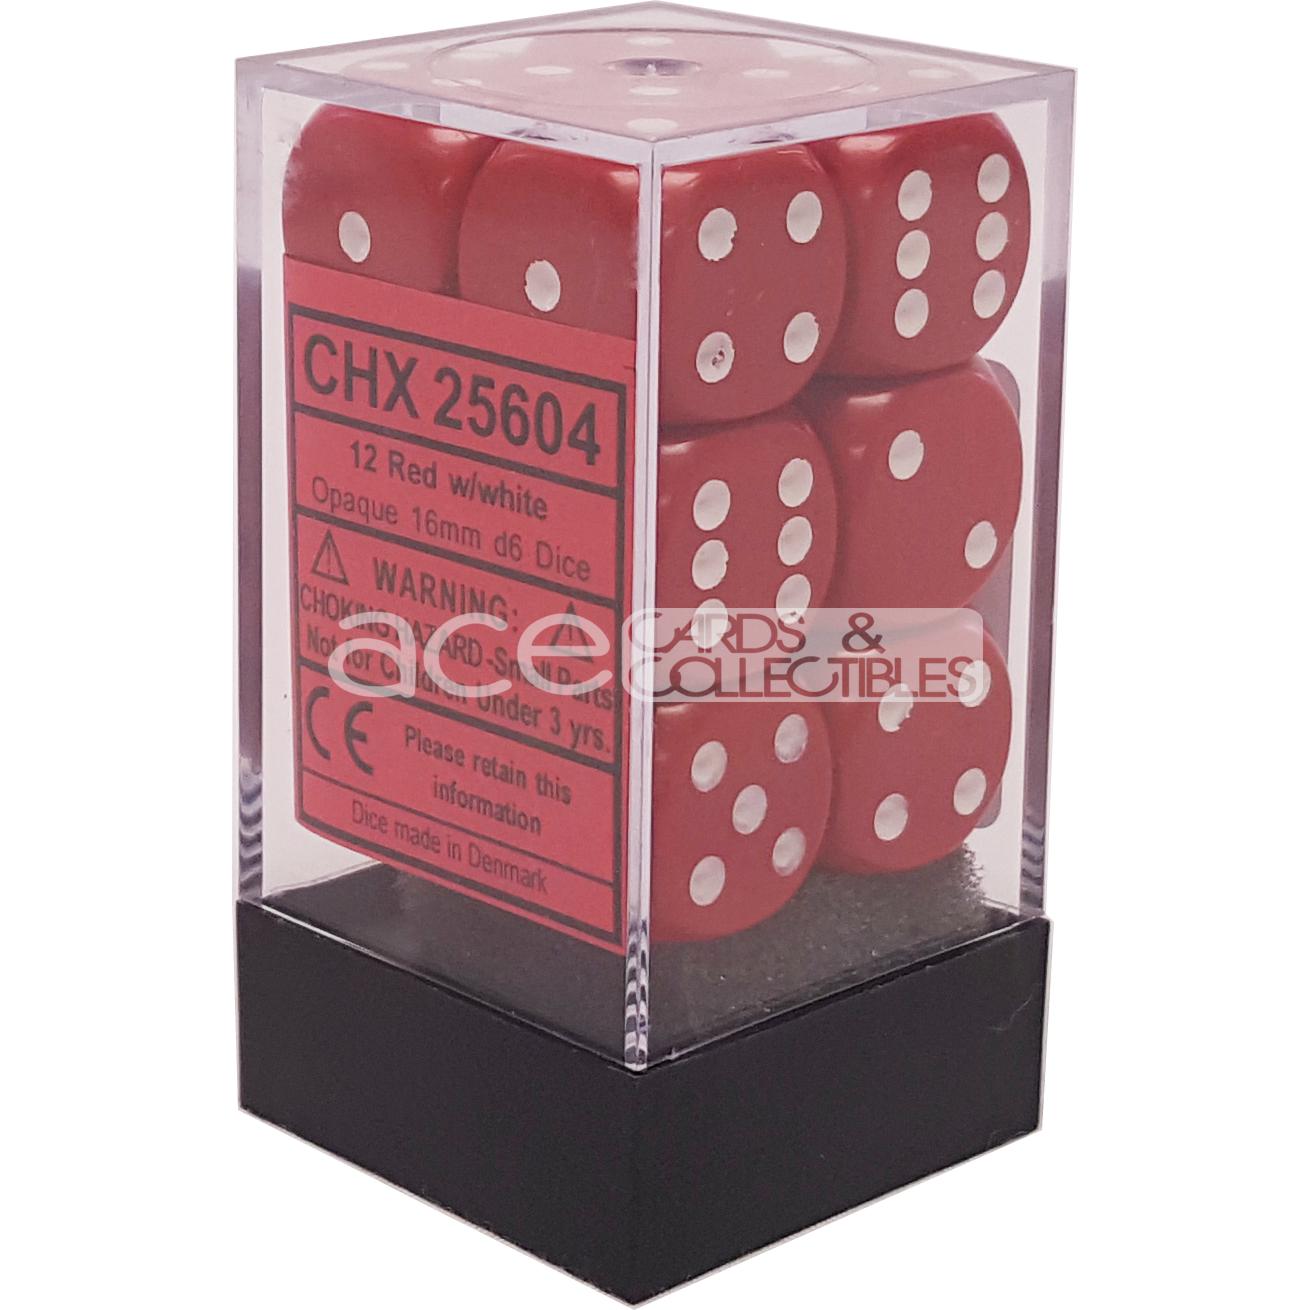 Chessex Opaque 16mm d6 12pcs Dice (Red/White) [CHX25604]-Chessex-Ace Cards & Collectibles